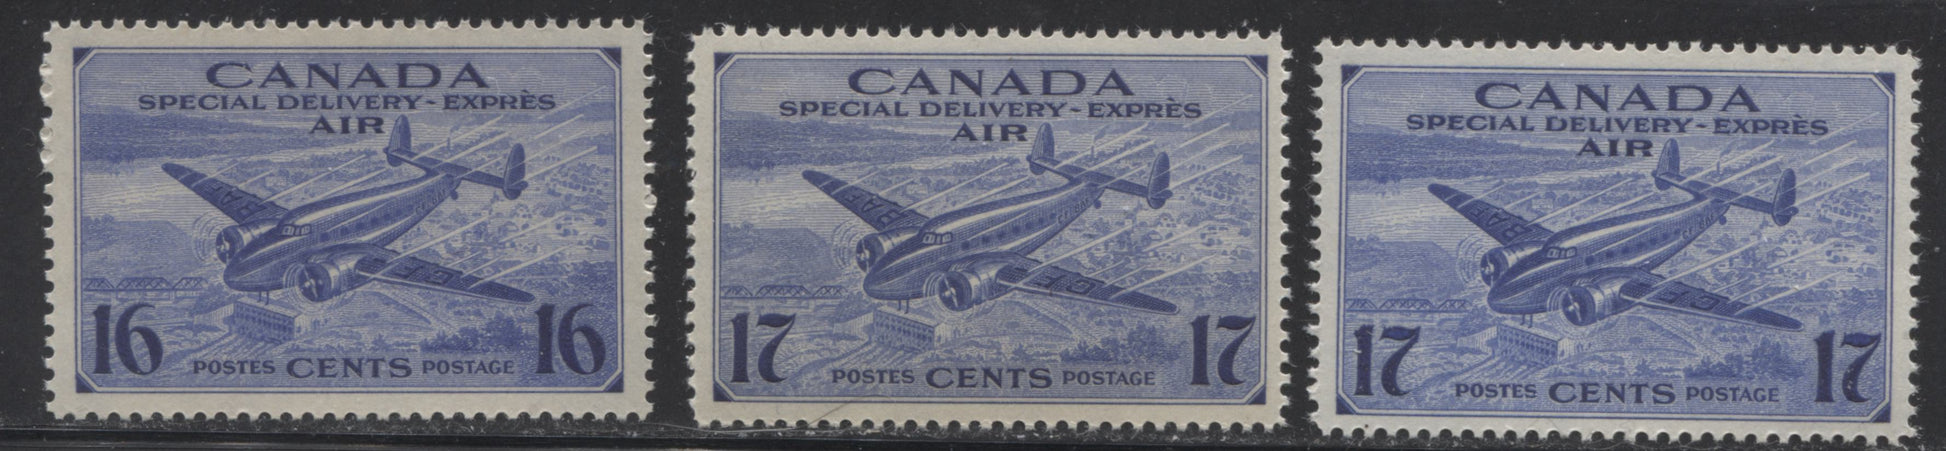 Canada #C7-C8, CE1-CE2, E10 1942-1946 War Effort Issue - Specialized Group of 13 VF NH Airmail and Special Delivery Stamps Brixton Chrome 